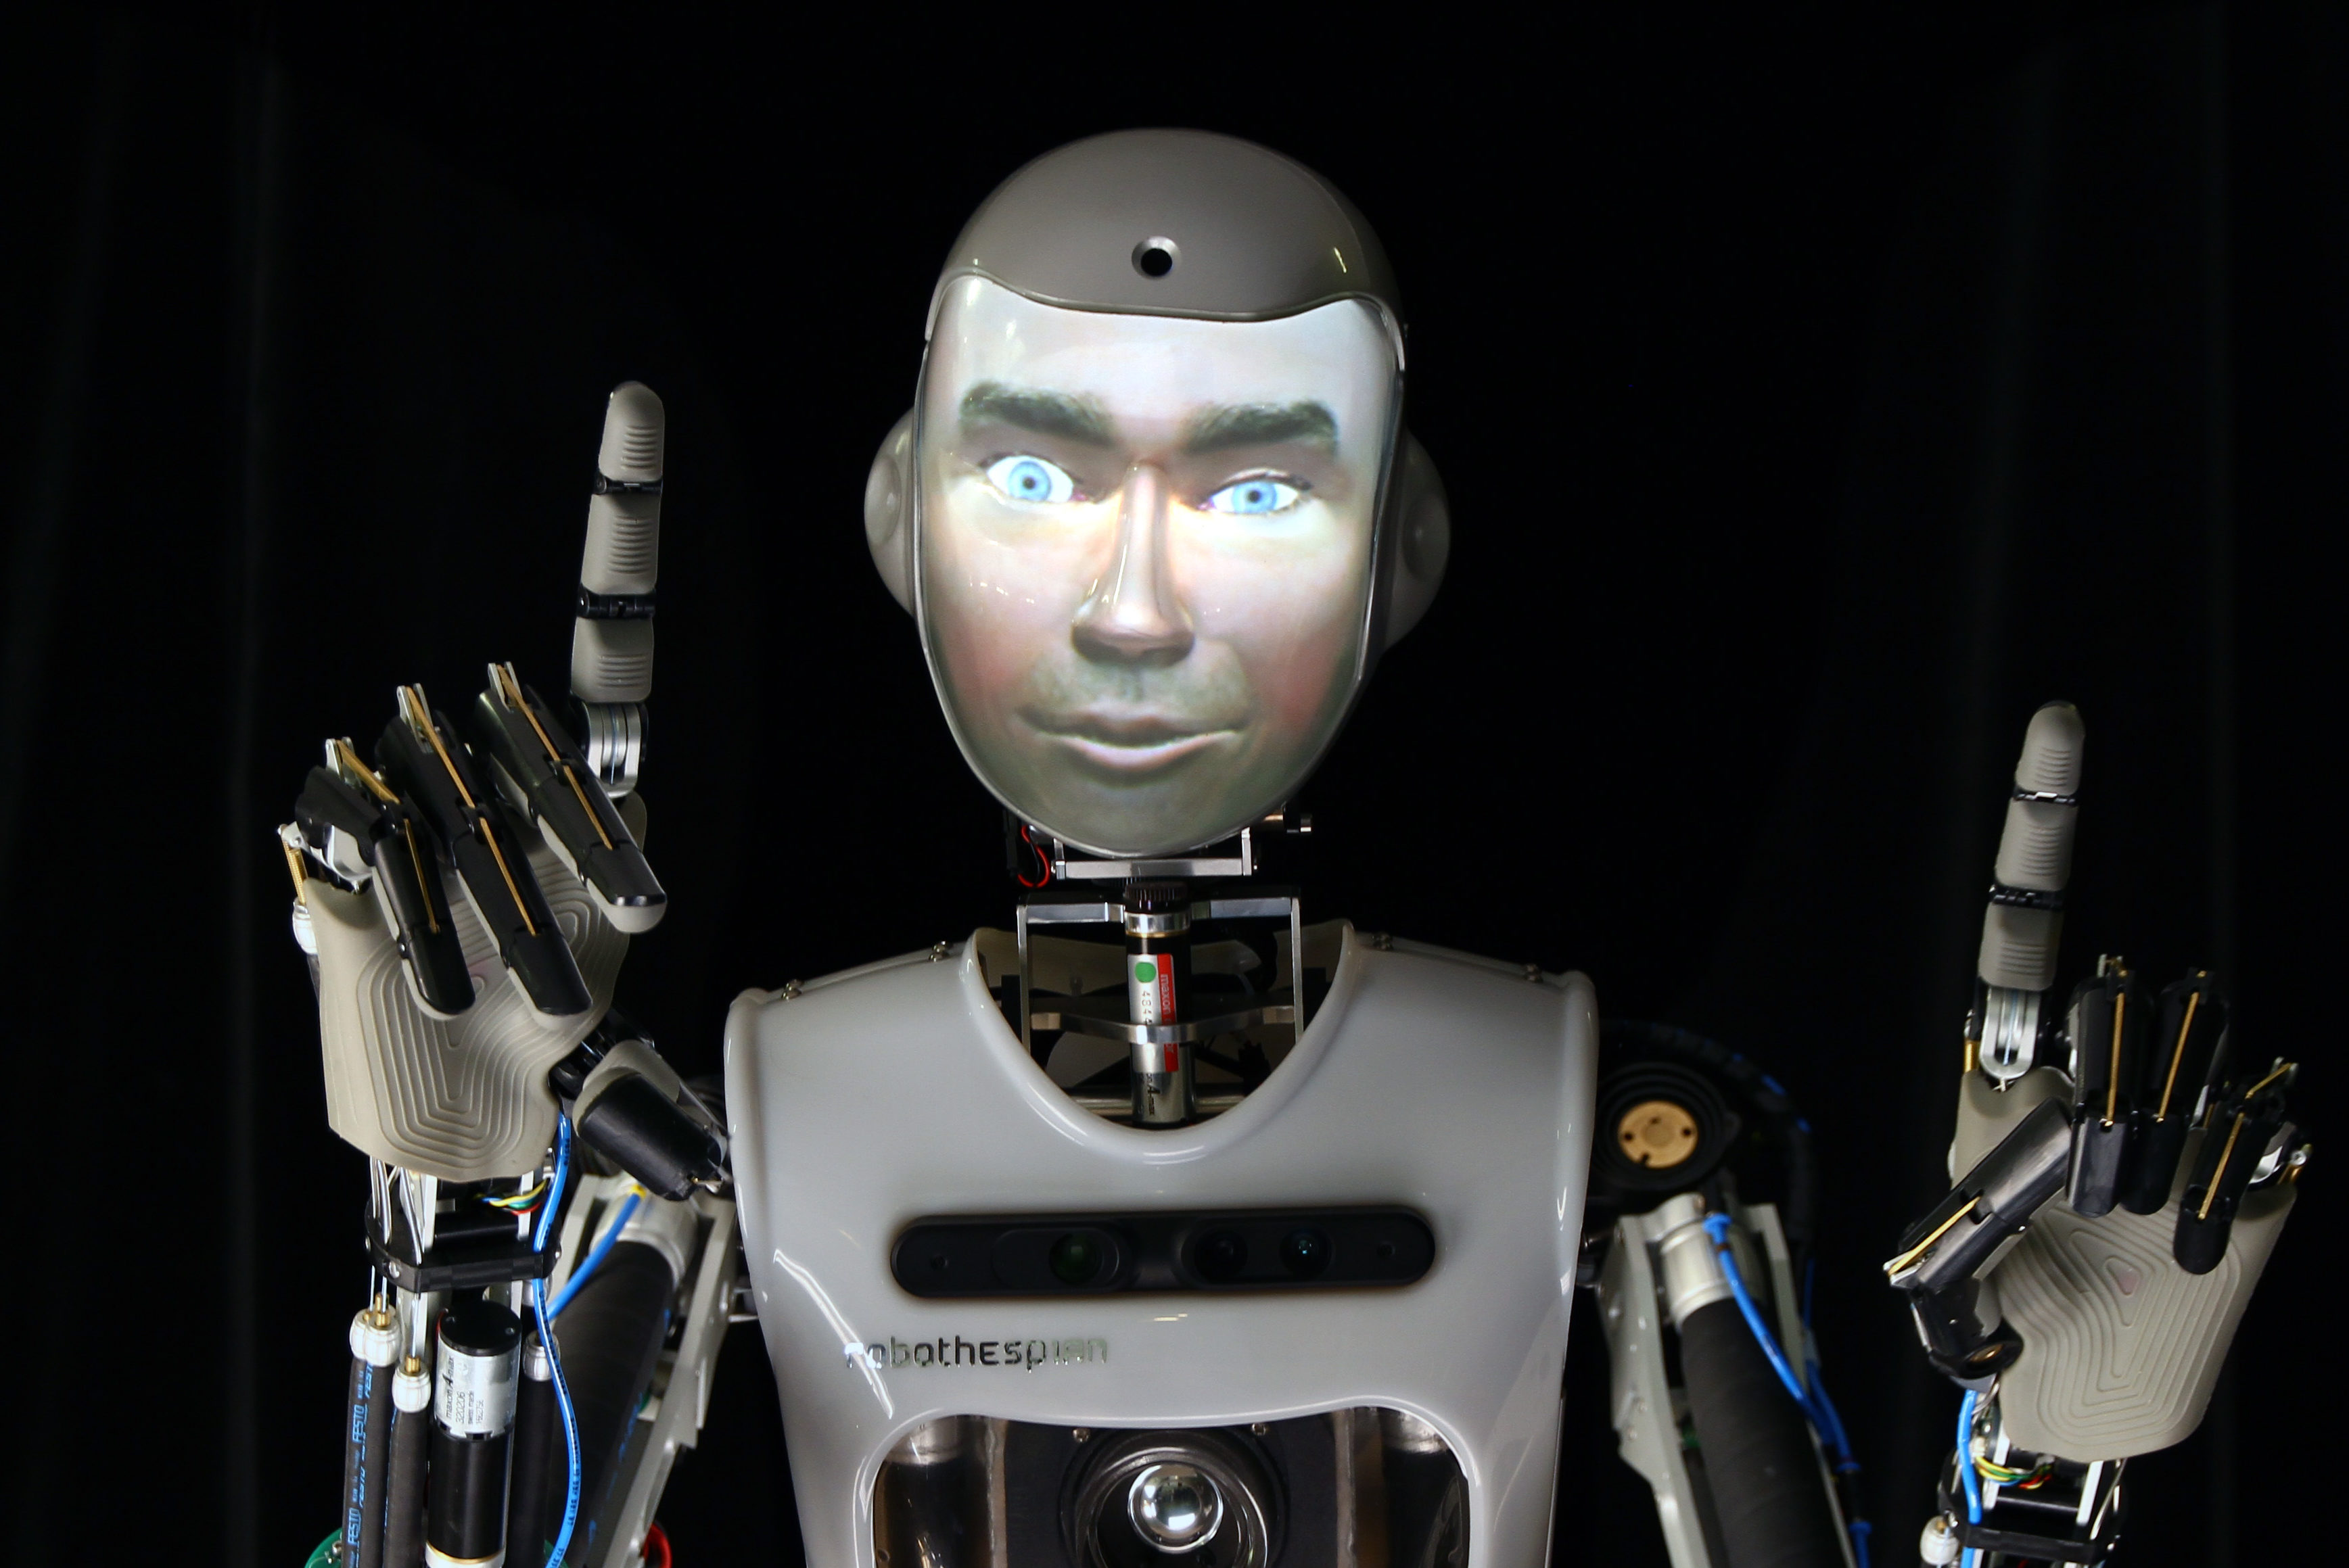 RoboThespian is due to come to Aberdeen in the summer of 2020.